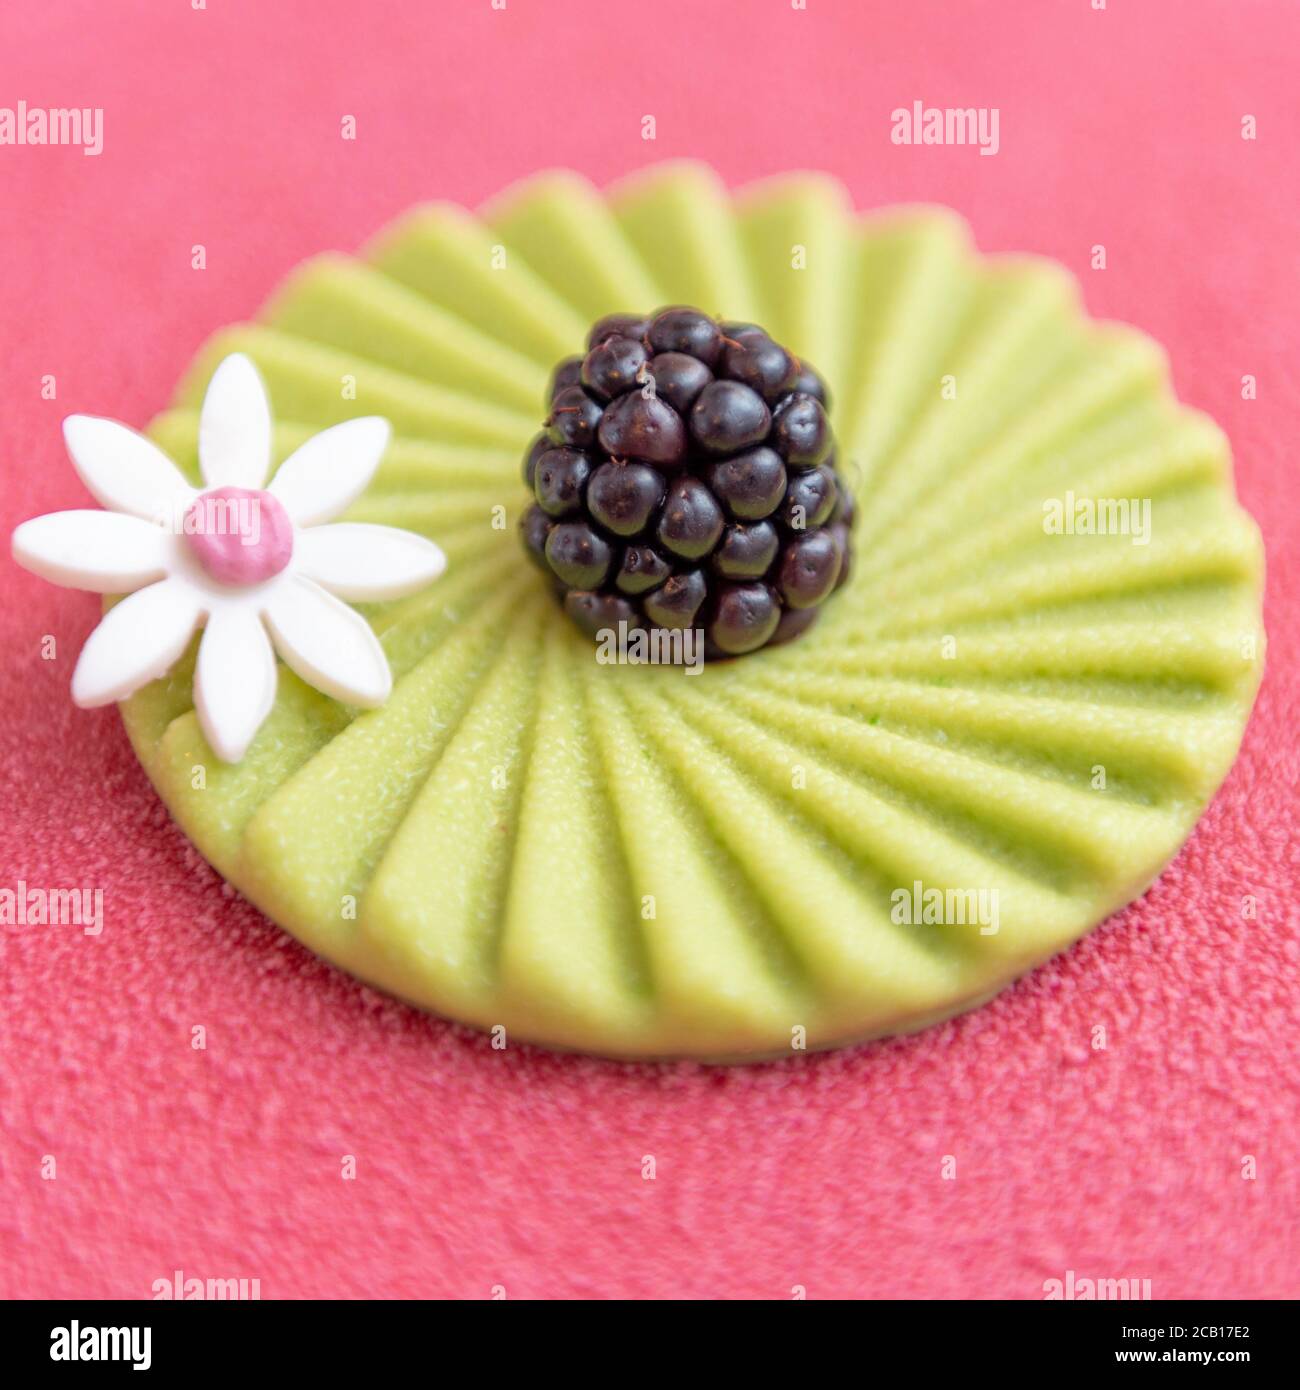 pink cake surface with white flower ornament, green chocolate disk and a blackberry Stock Photo